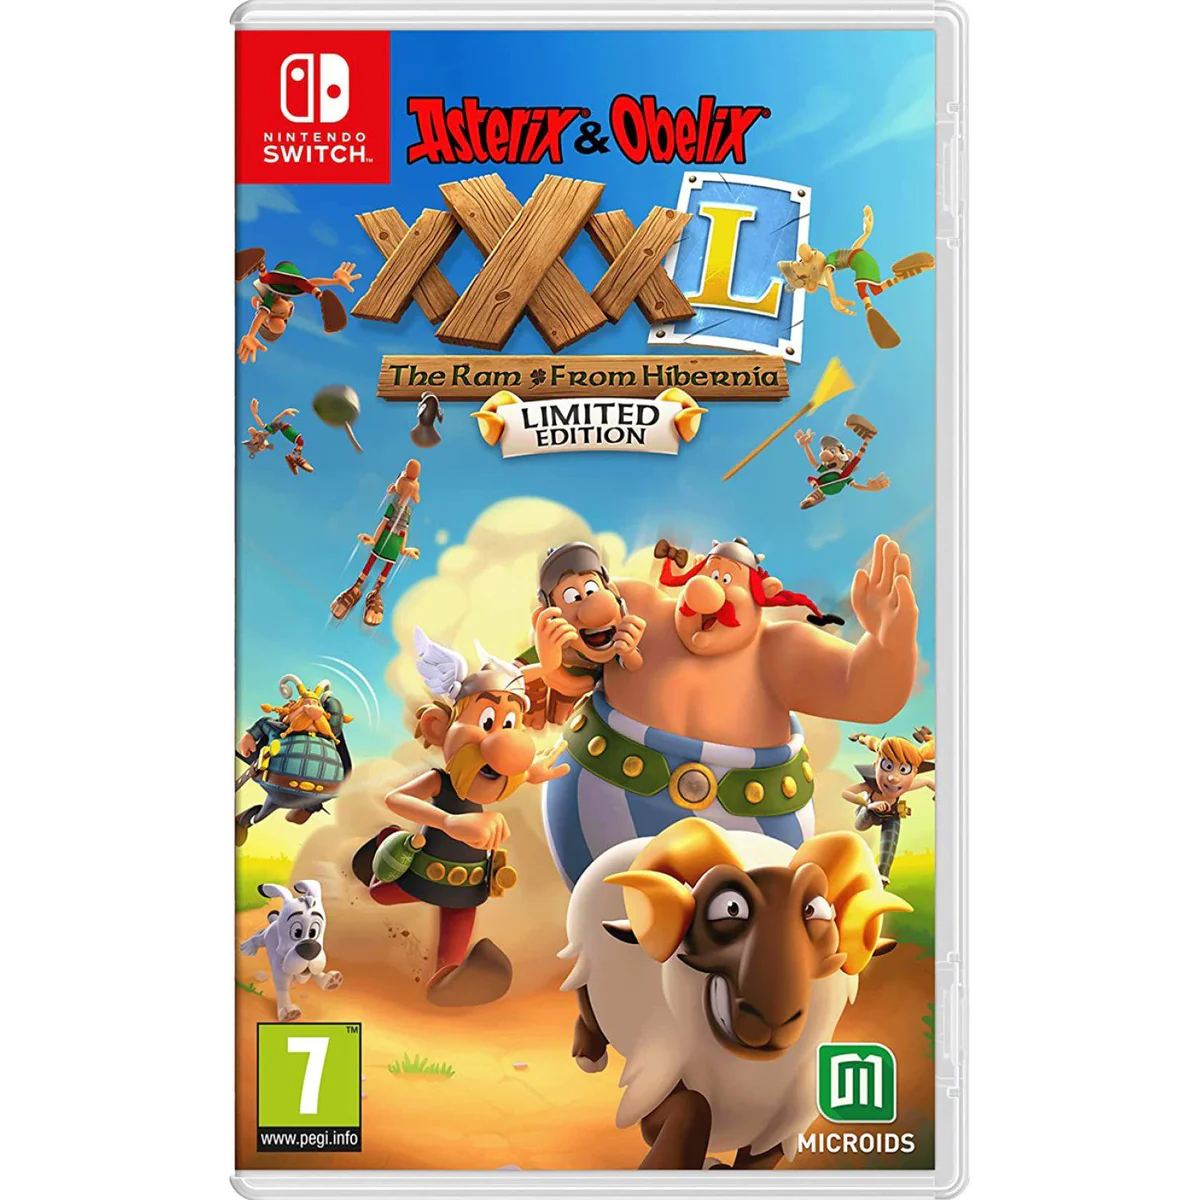 Asterix and Obelix XXXL 3 - Limited Edition NSW